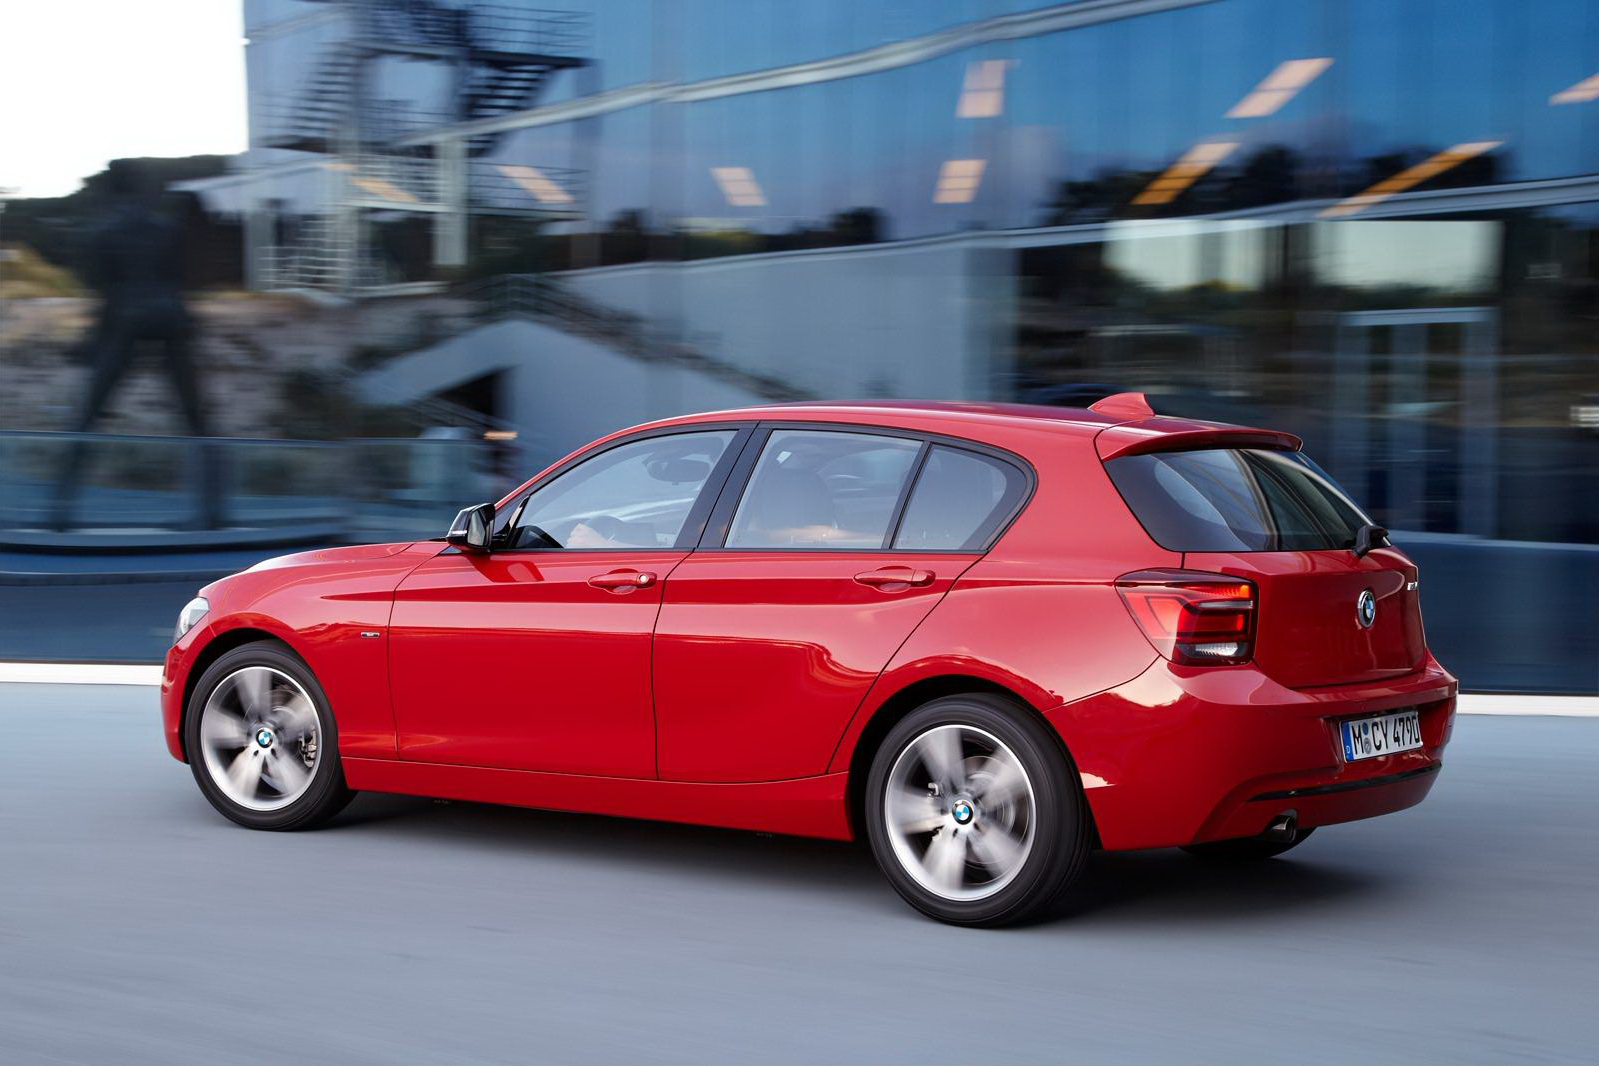 2012 BMW 1Series Unveiled, gets New 1.6liter Turbo